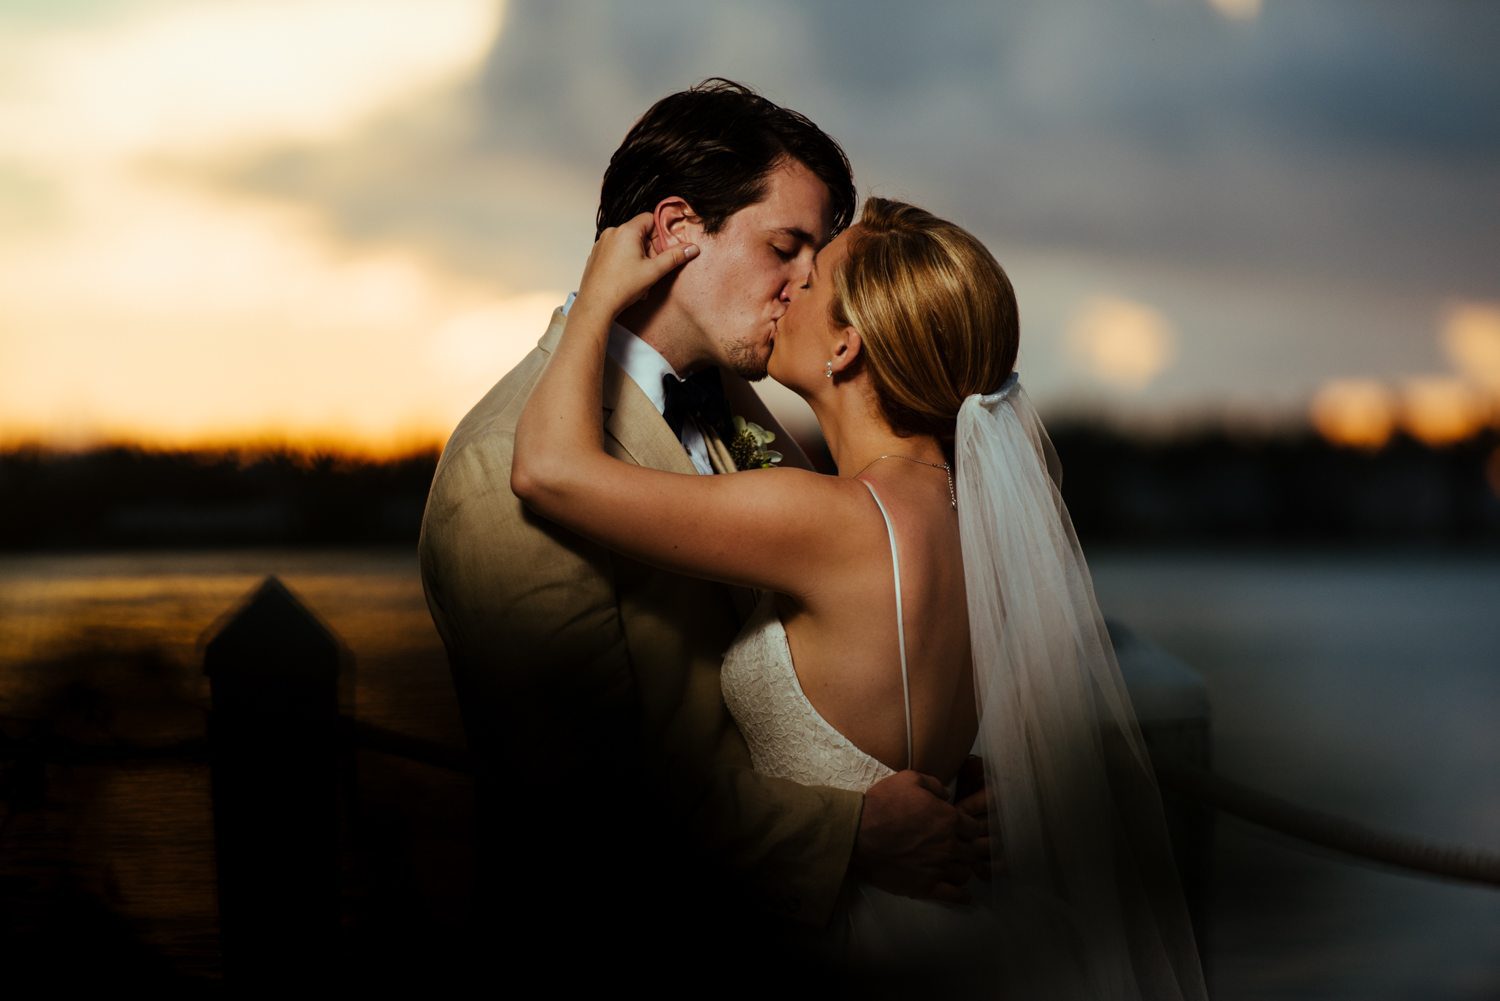 A bride and groom share a romantic kiss in front of the water at sunset during their Key West wedding.